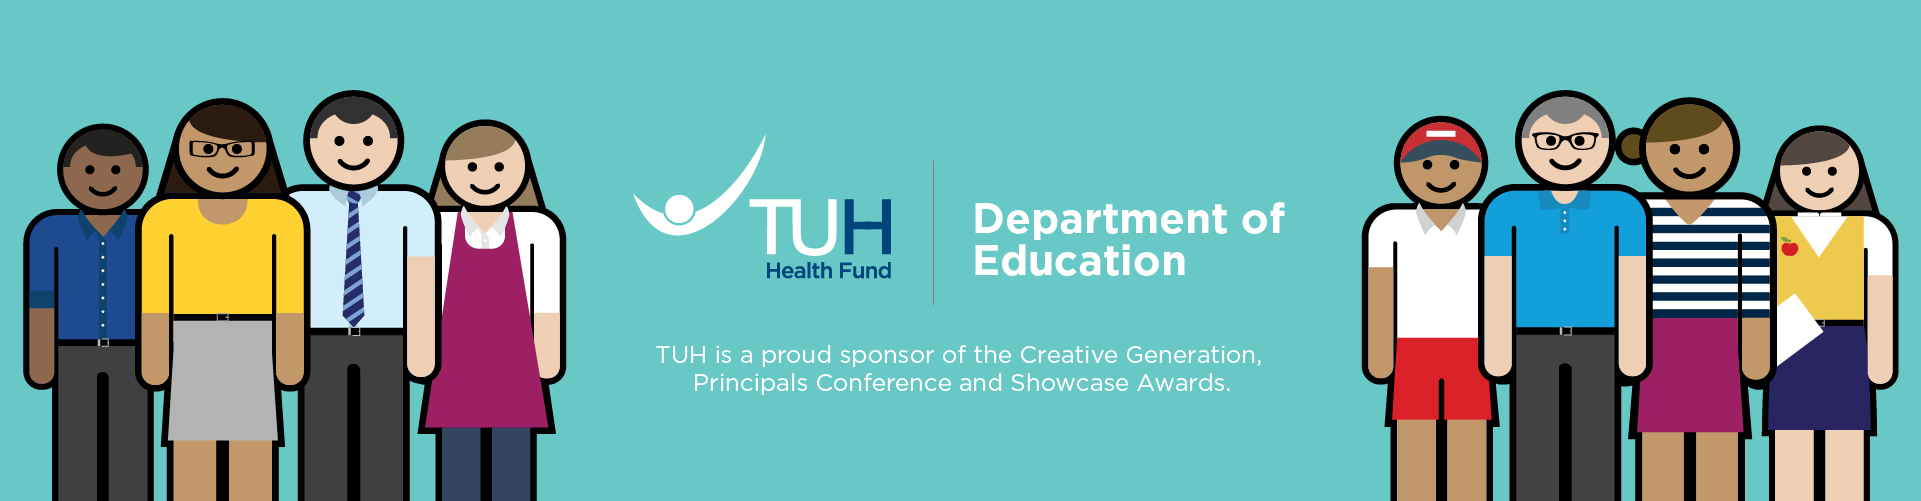 teachers union health fund sponsor of creative generation, principals conference and showcase awards for department of education